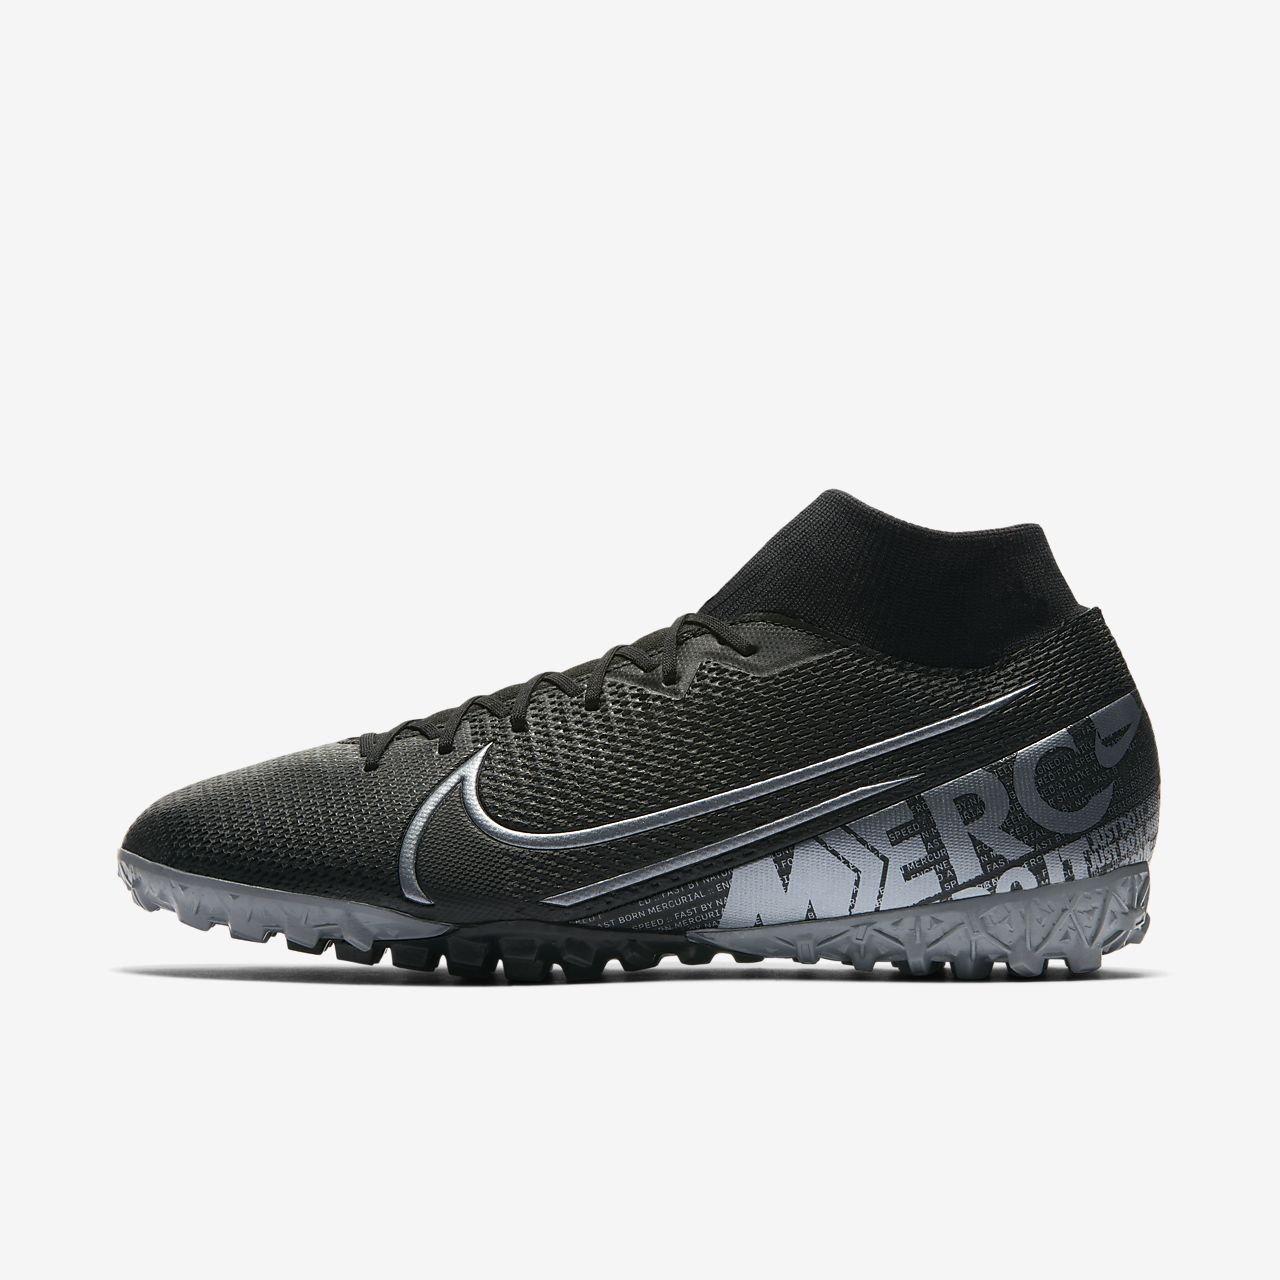 nike astro turf shoes off 65% - www 